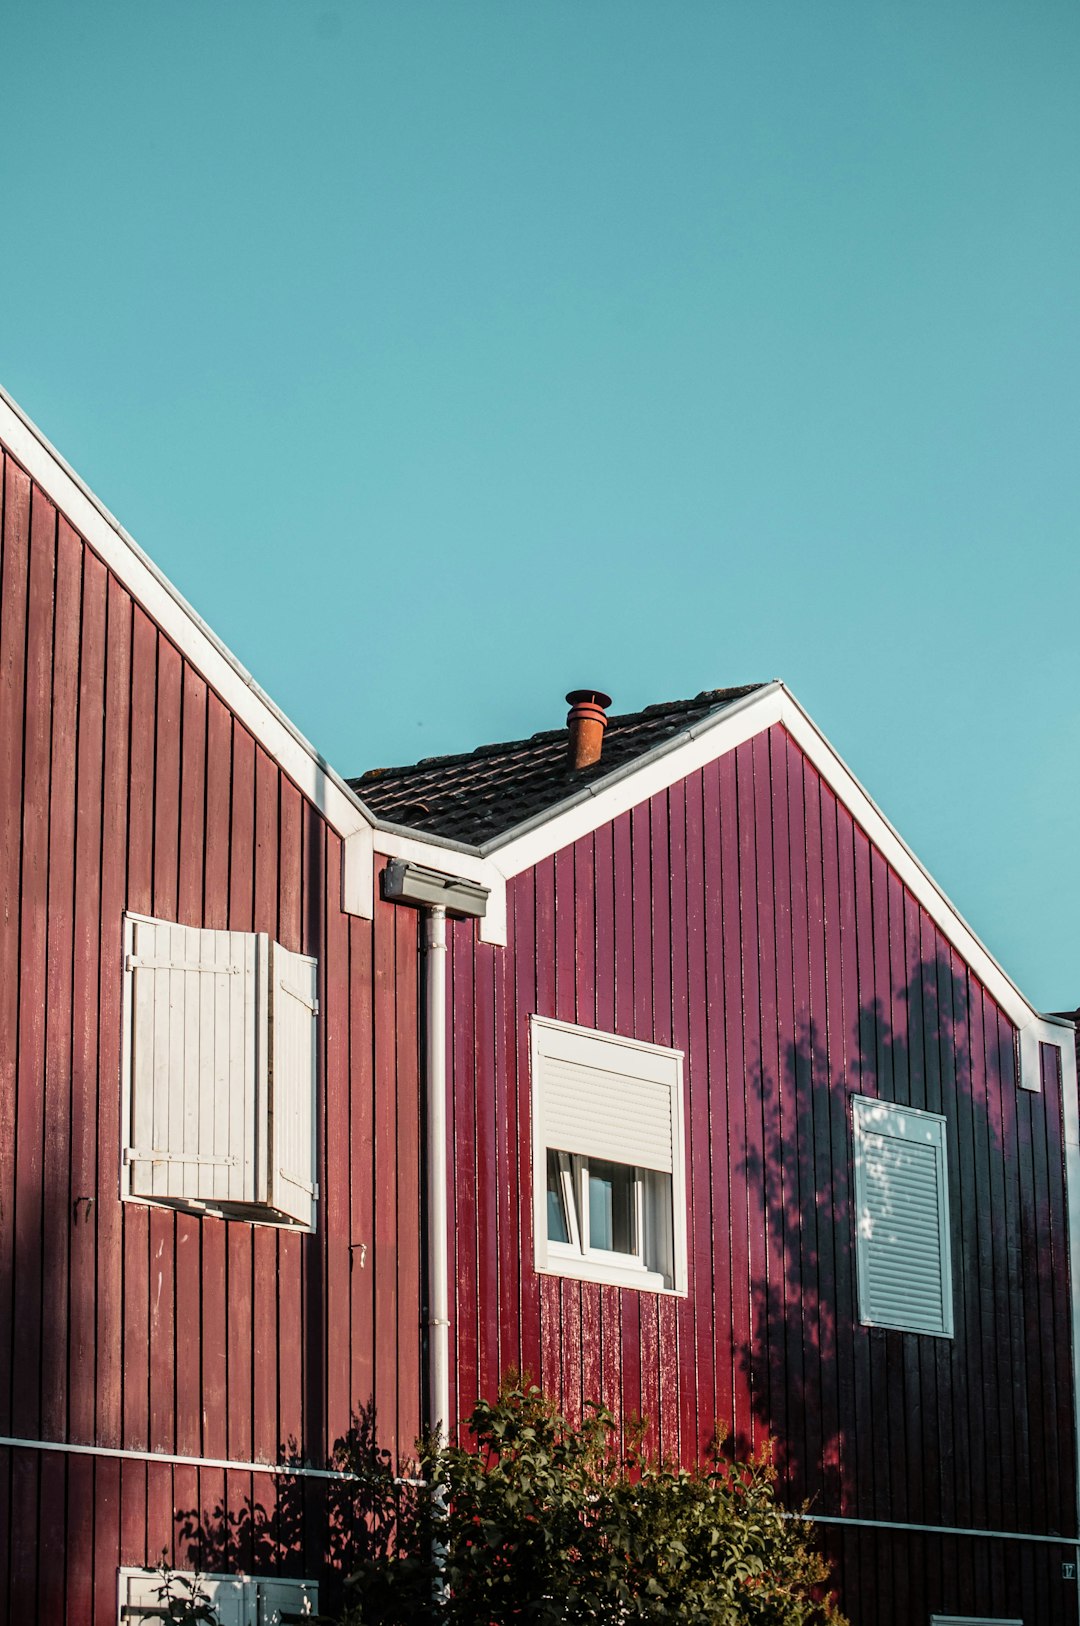 red and white wooden barn under blue sky during daytime